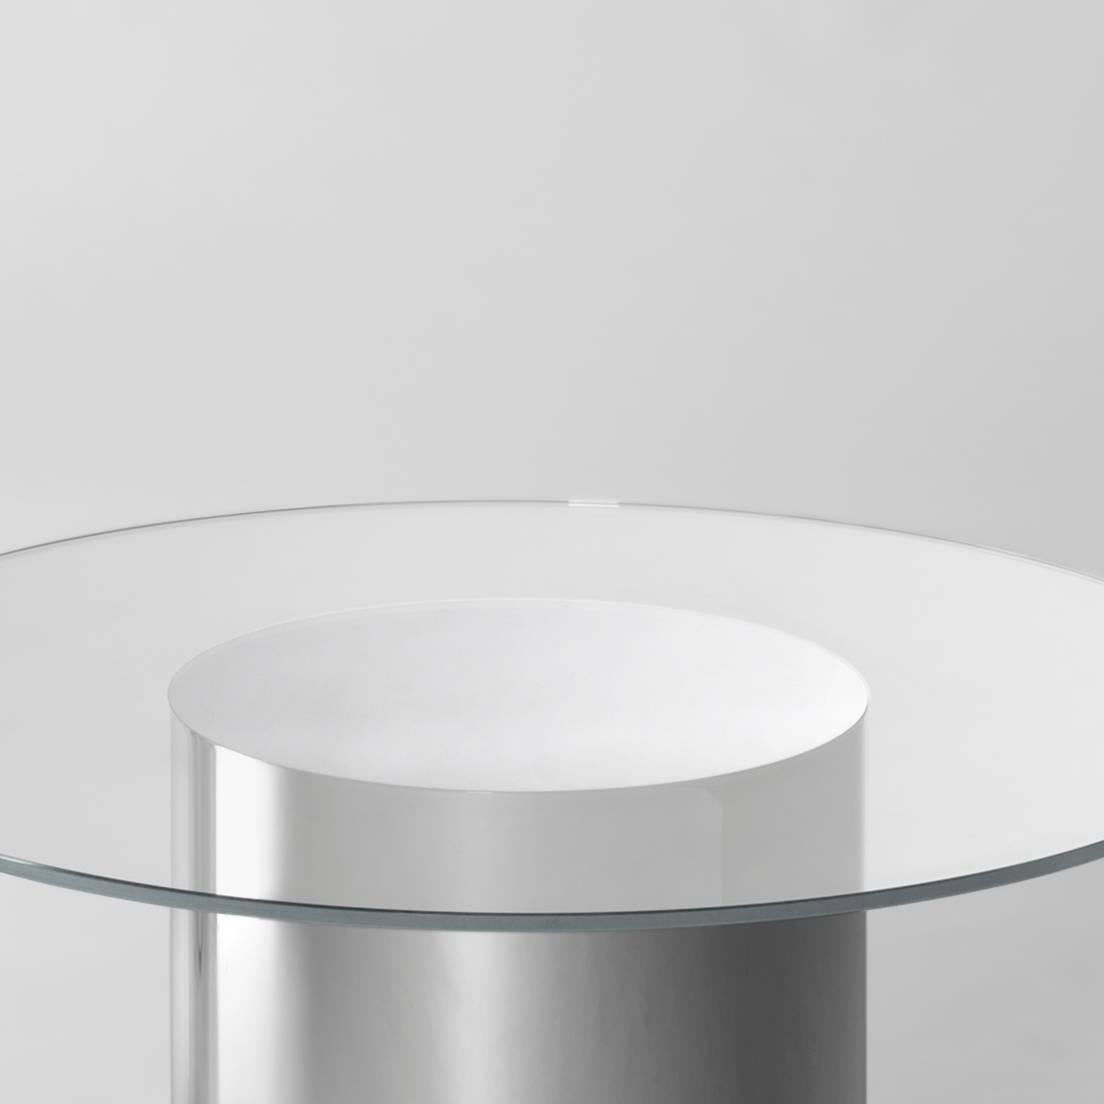 Side table model '2001' designed by Ramon Úbeda and Otto Canalda.
Manufactured by Bd (Spain).

The 2001 side tables are made from an ultra-clear glass and a Pyrex tube mirrored base, having no joining. The metallic brilliance creates an optical